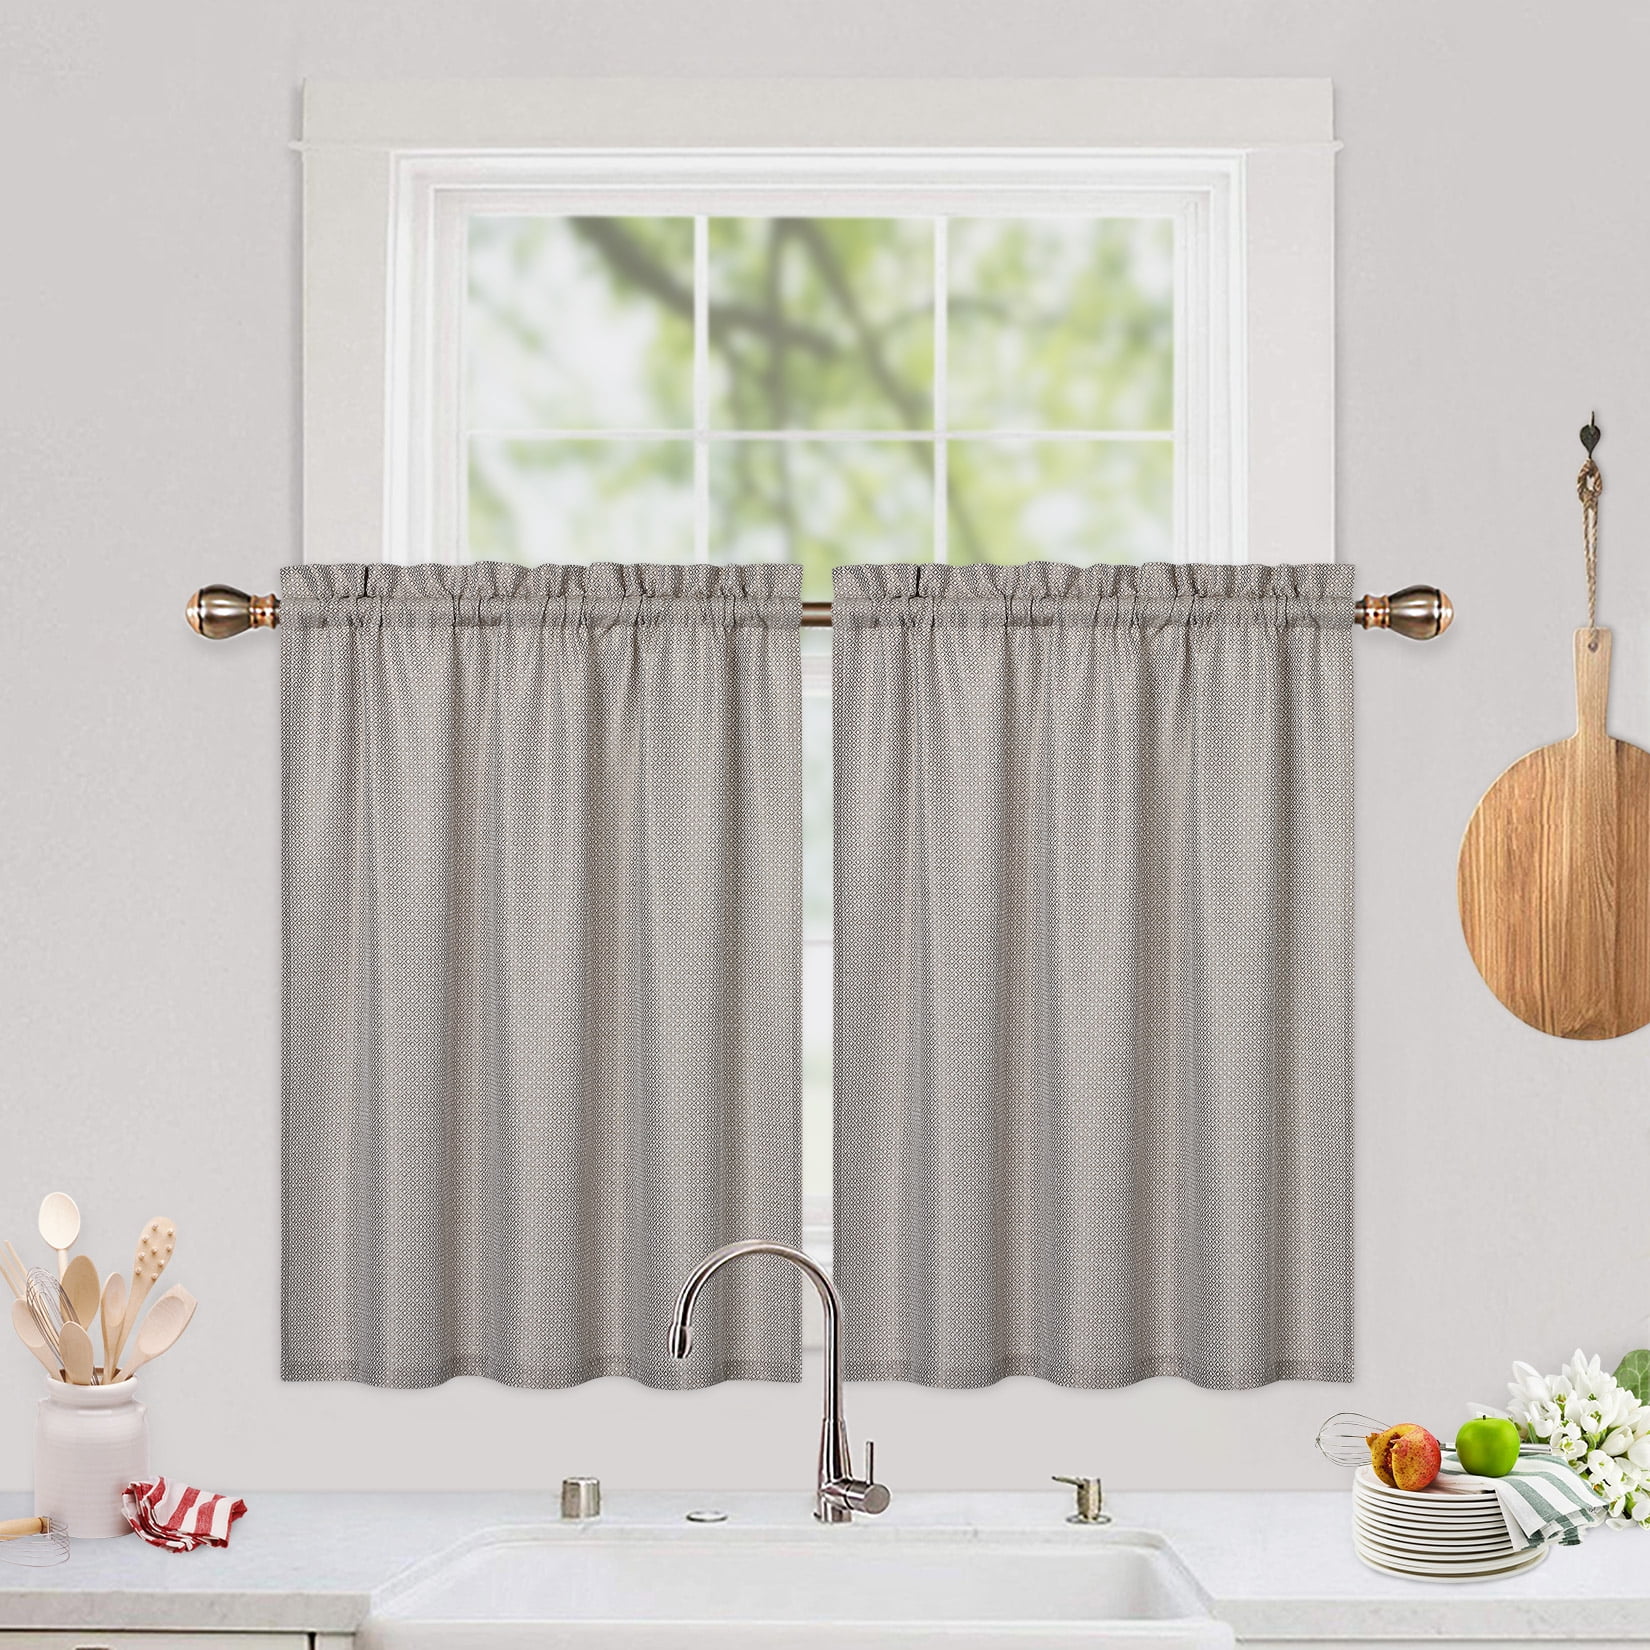 Set of 2 Waterproof Shot Window Curtains for Bathroom Half Window Treatment Curtains Cafe Curtains 30 x 24 Grey Haperlare Waffle-Weave Textured Tier Curtains for Kitchen